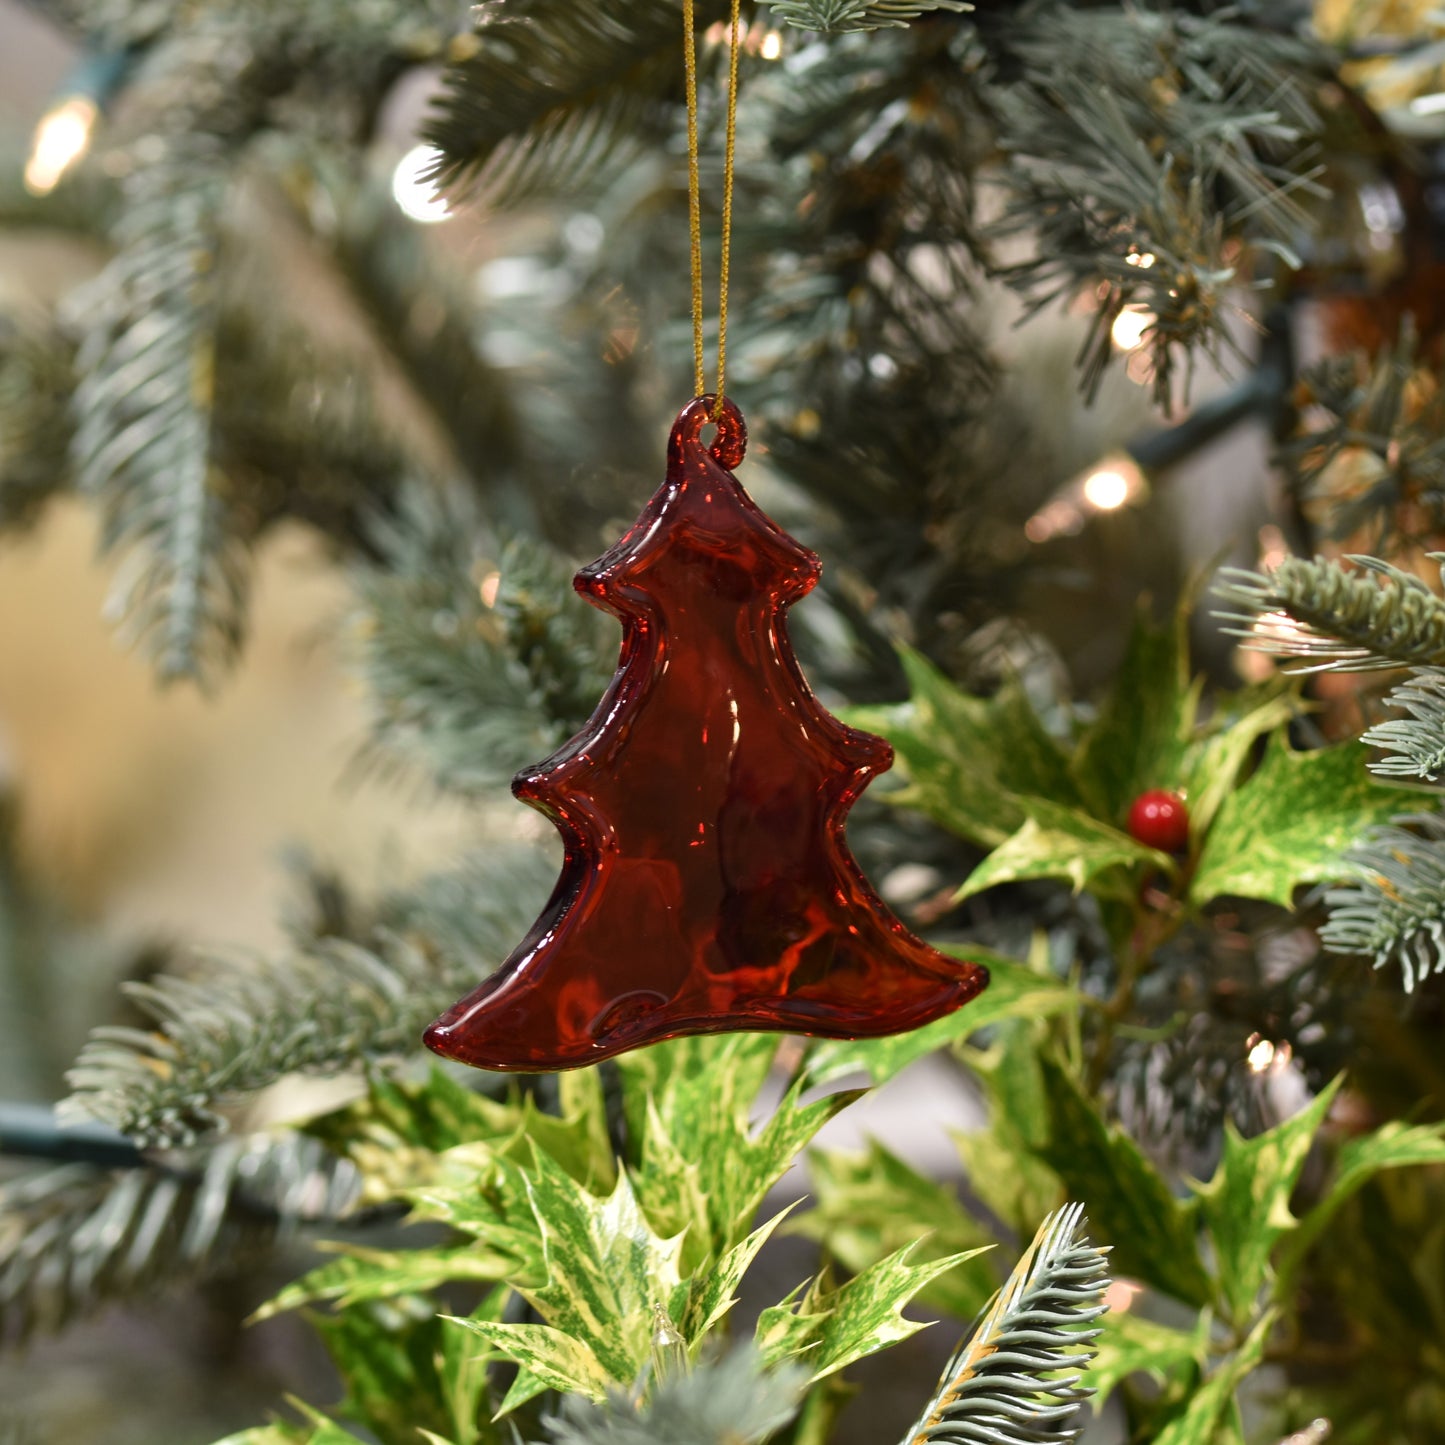 Red Glass Christmas Tree Decoration